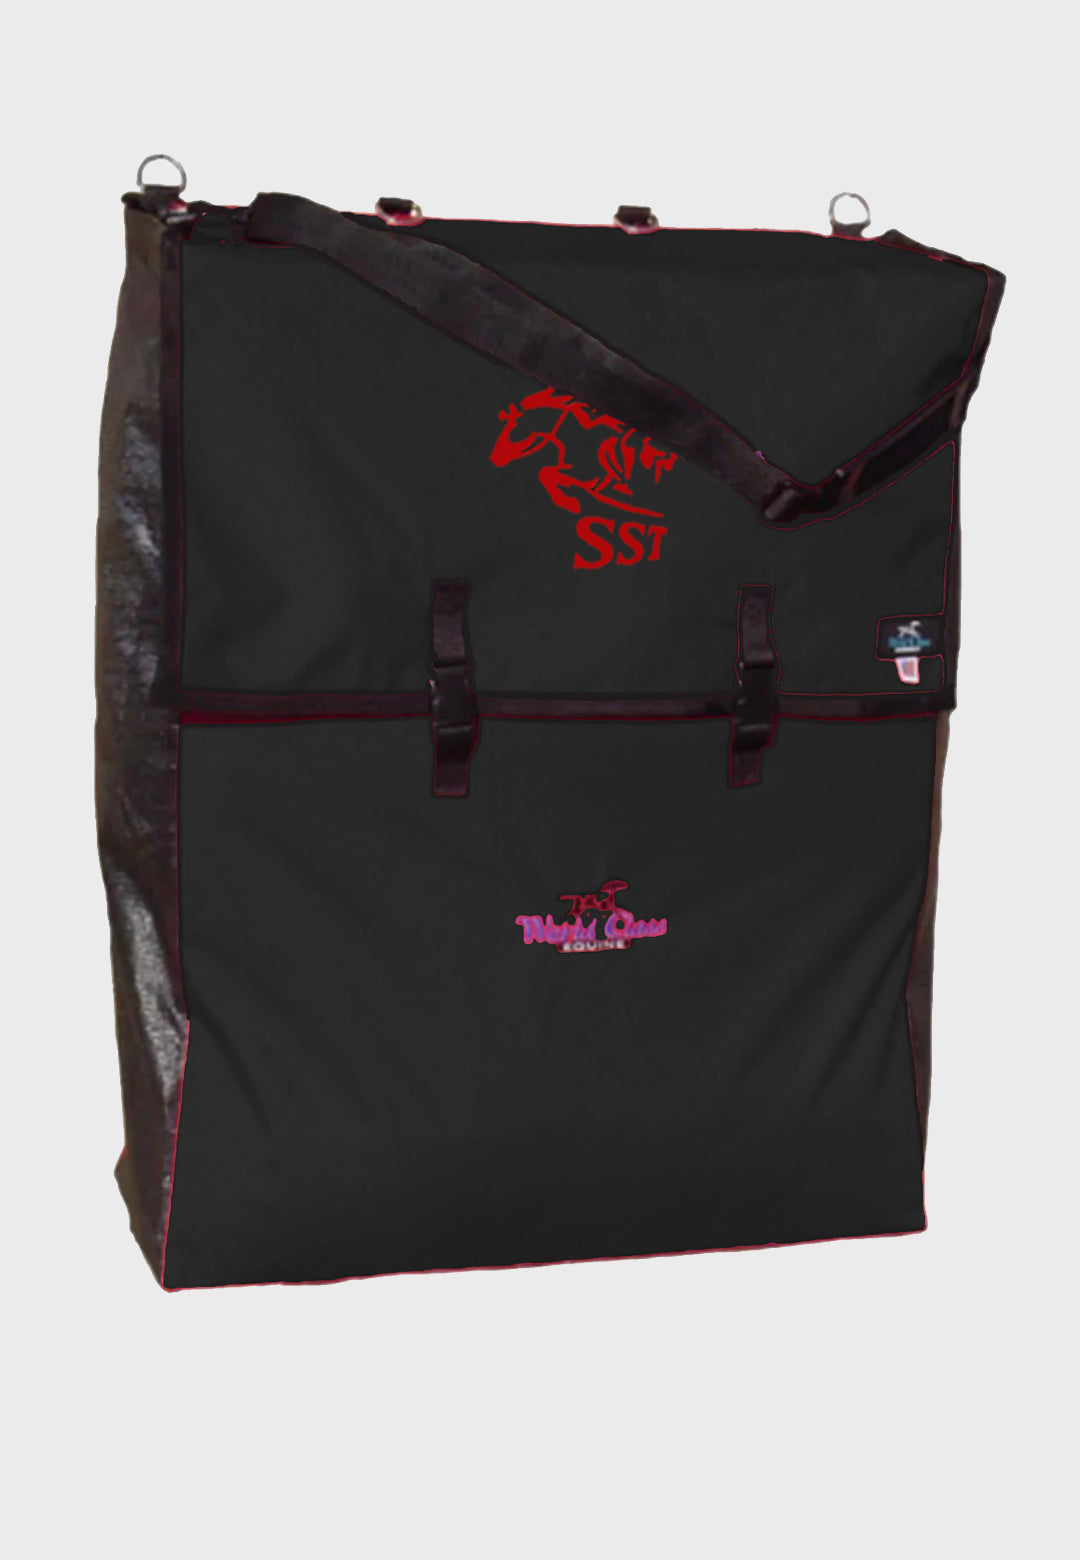 SST World Class Equine Stall Front Bag - Black